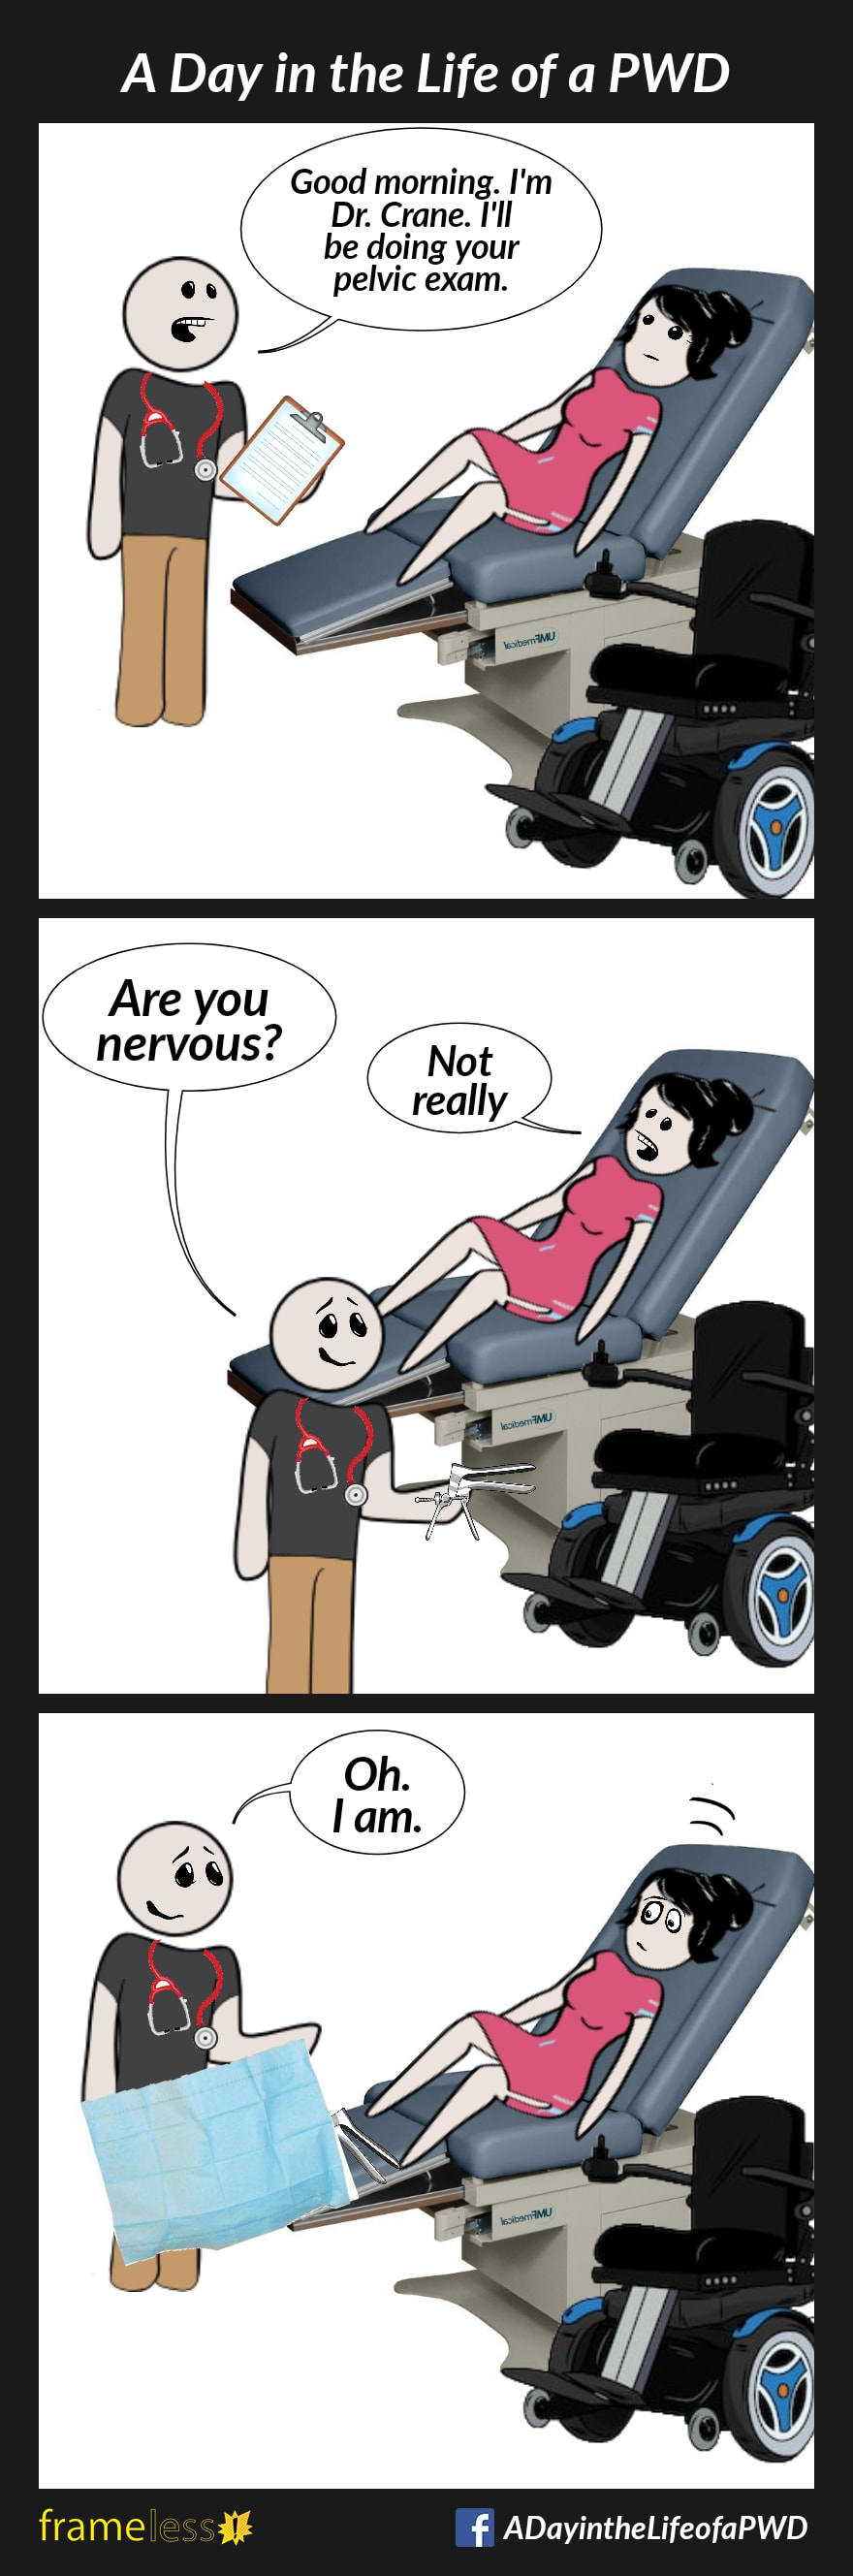 COMIC STRIP 
A Day in the Life of a PWD (Person With a Disability) 

Frame 1:
A woman who uses a power wheelchair is laying on an exam table, talking with a doctor.
DOCTOR: Good morning. I'm Dr. Crane. I'll be doing your pelvic exam.

Frame 2:
DOCTOR (preparing equipment for exam): Are you nervous?
WOMAN: Not really

Frame 3:
DOCTOR: Oh. I am.